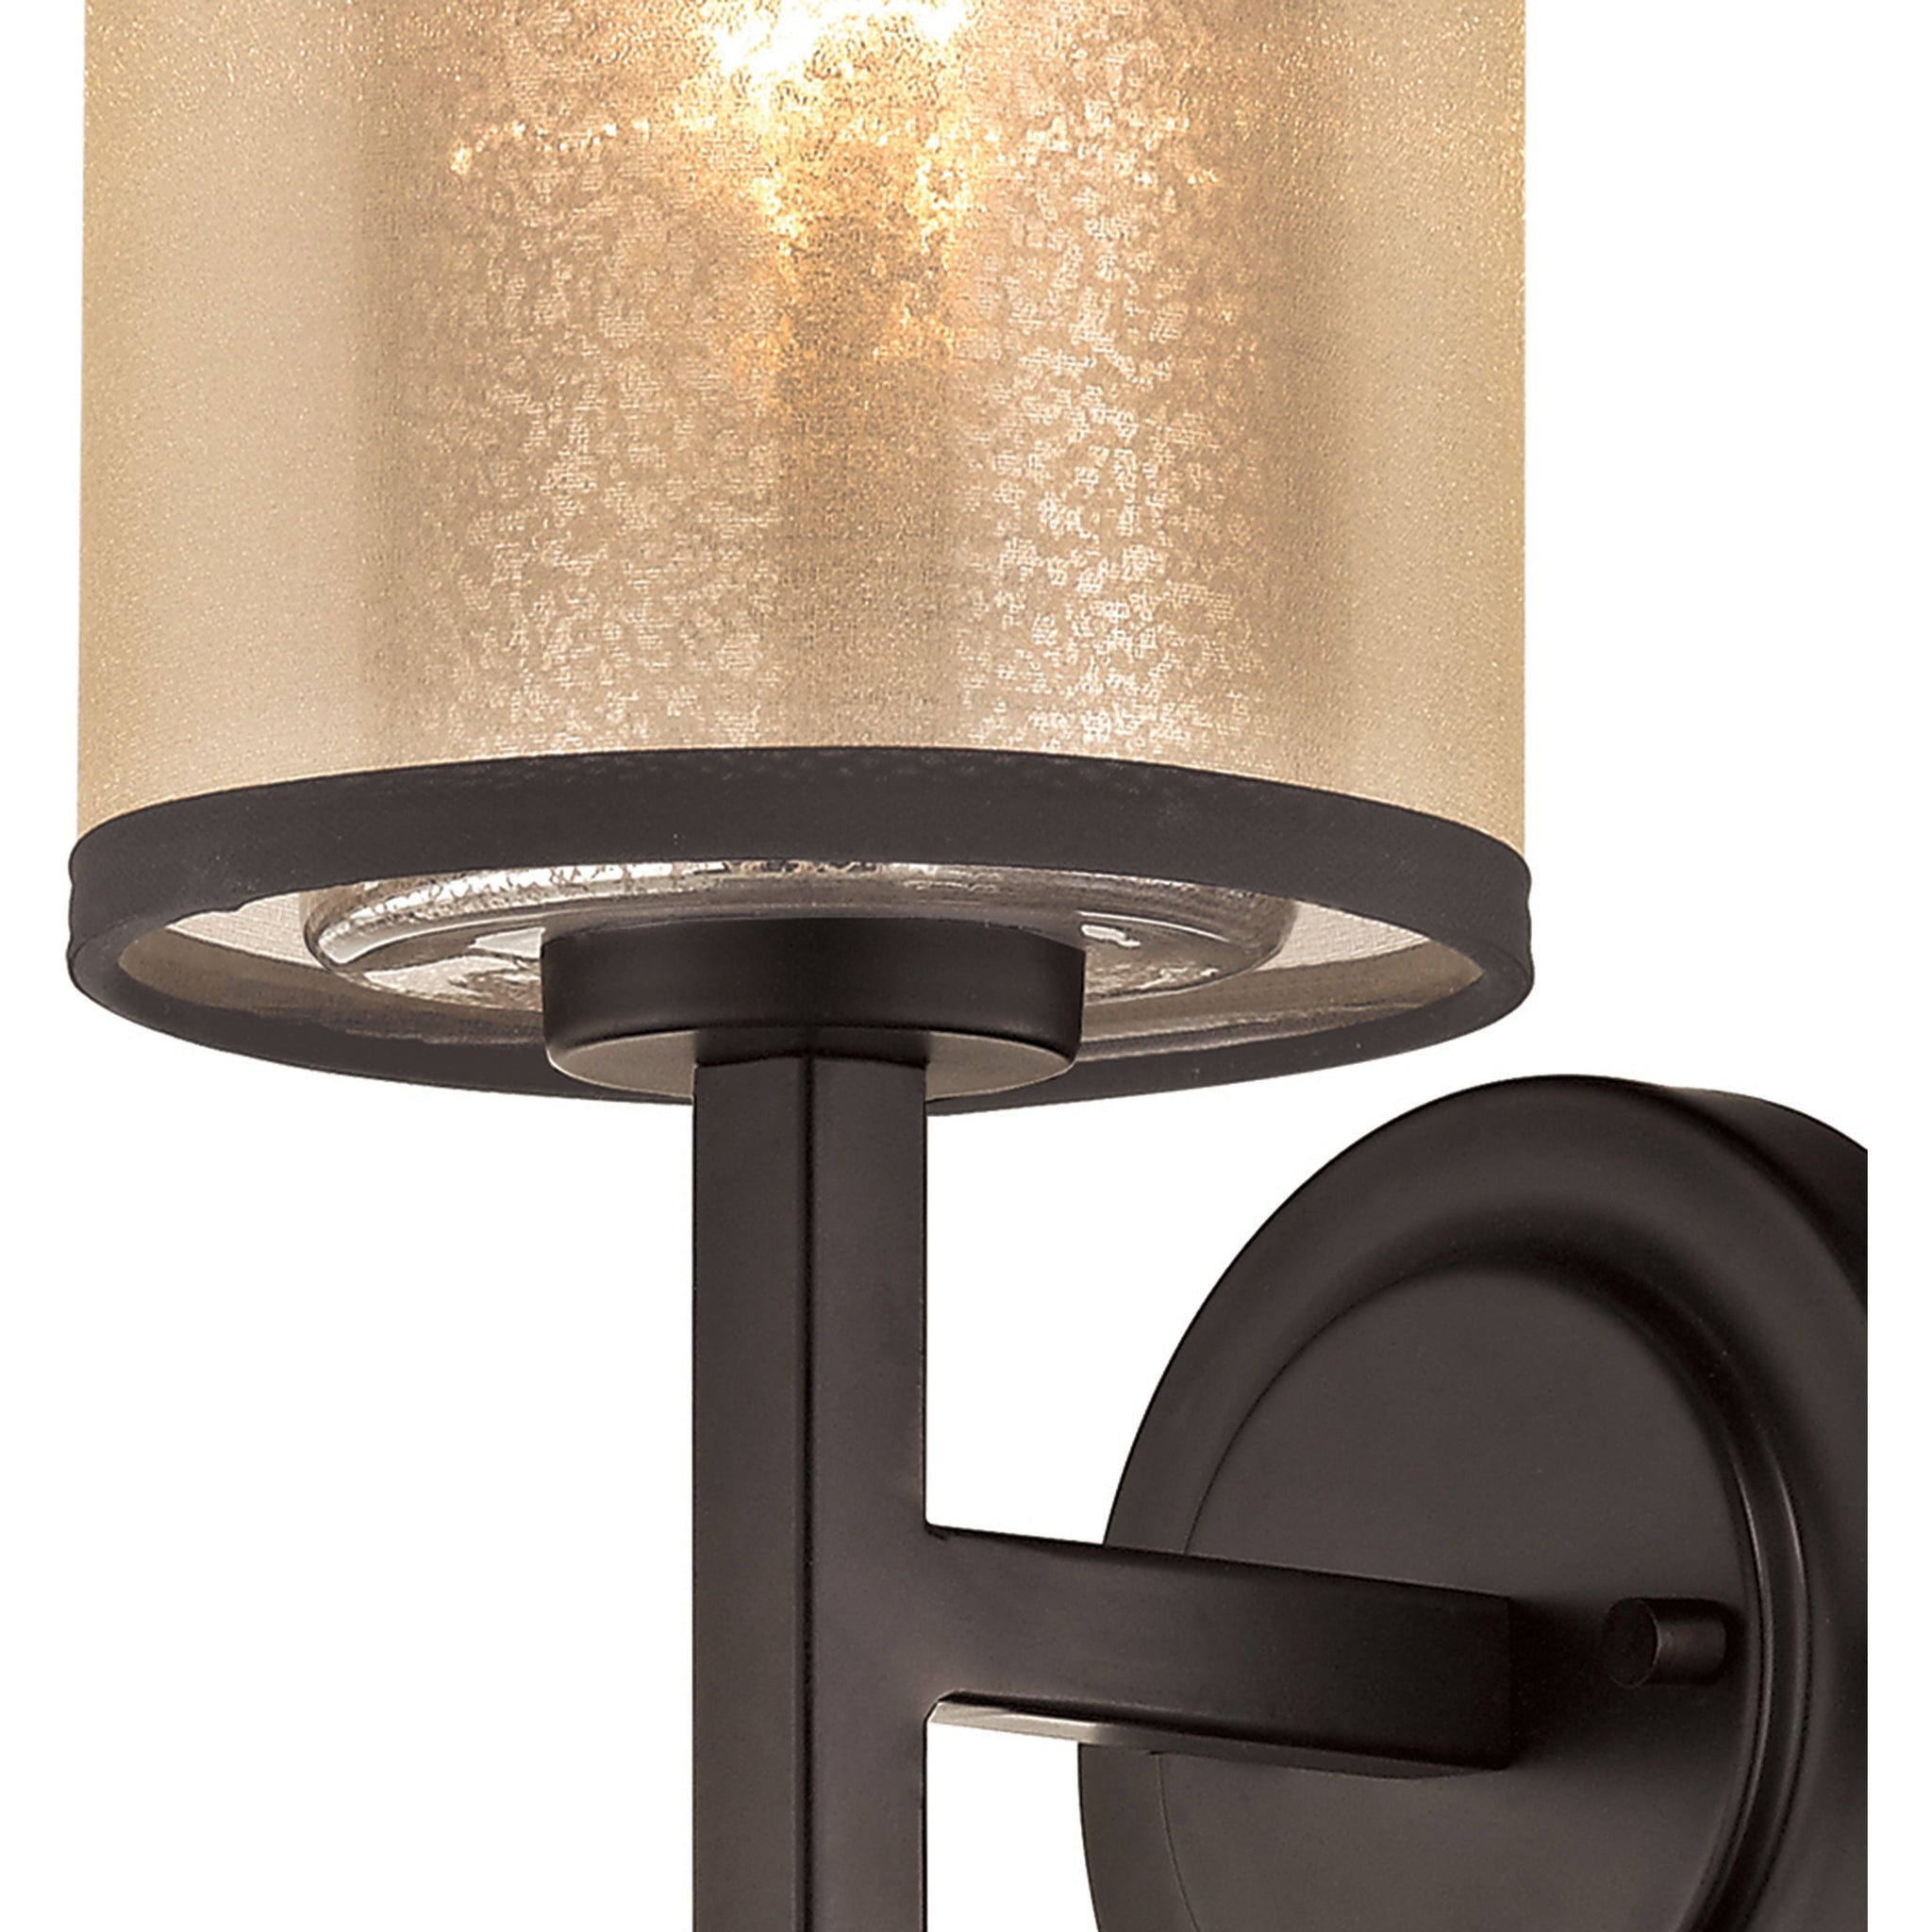 Diffusion 24" High 1-Light Sconce